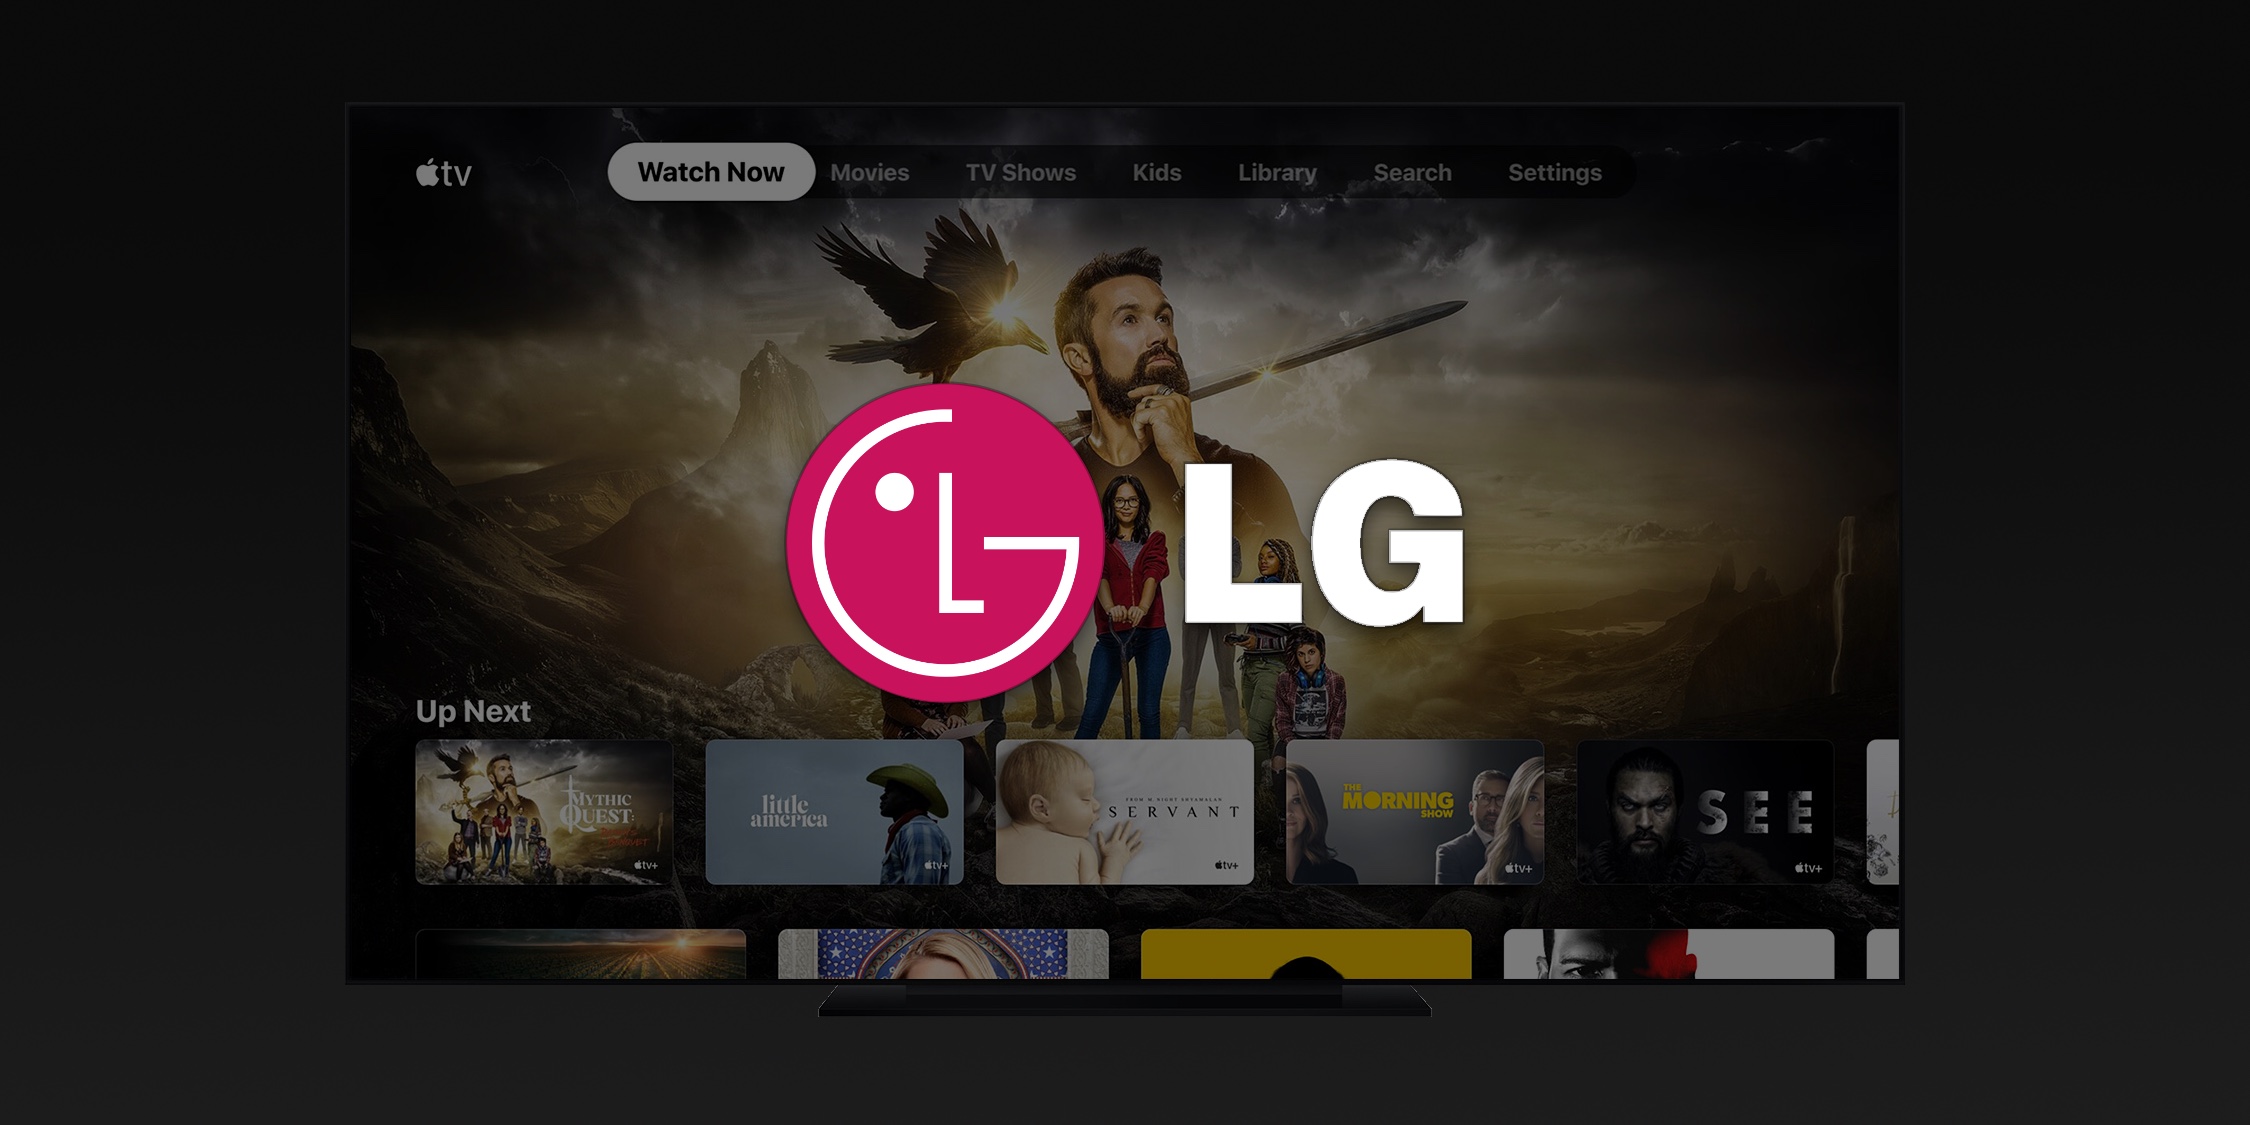 Lg Releases Apple Tv App For 2018 Oled, How To Mirror From Macbook Lg Tv